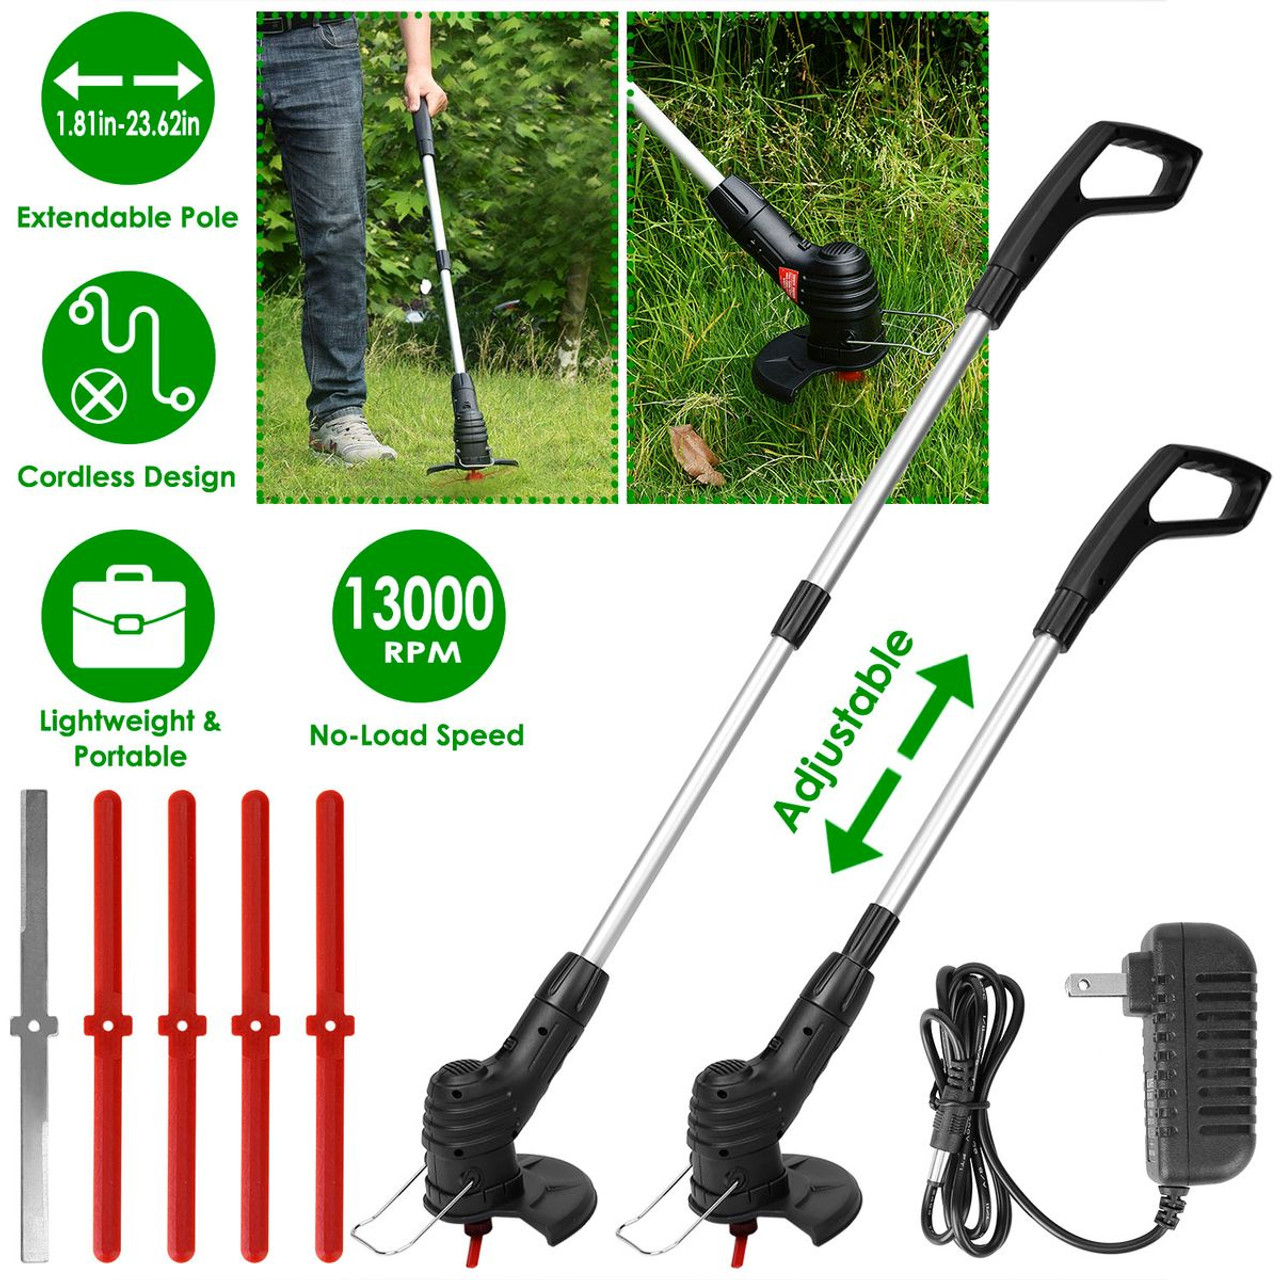 LakeForest® Rechargeable Grass Trimmer product image